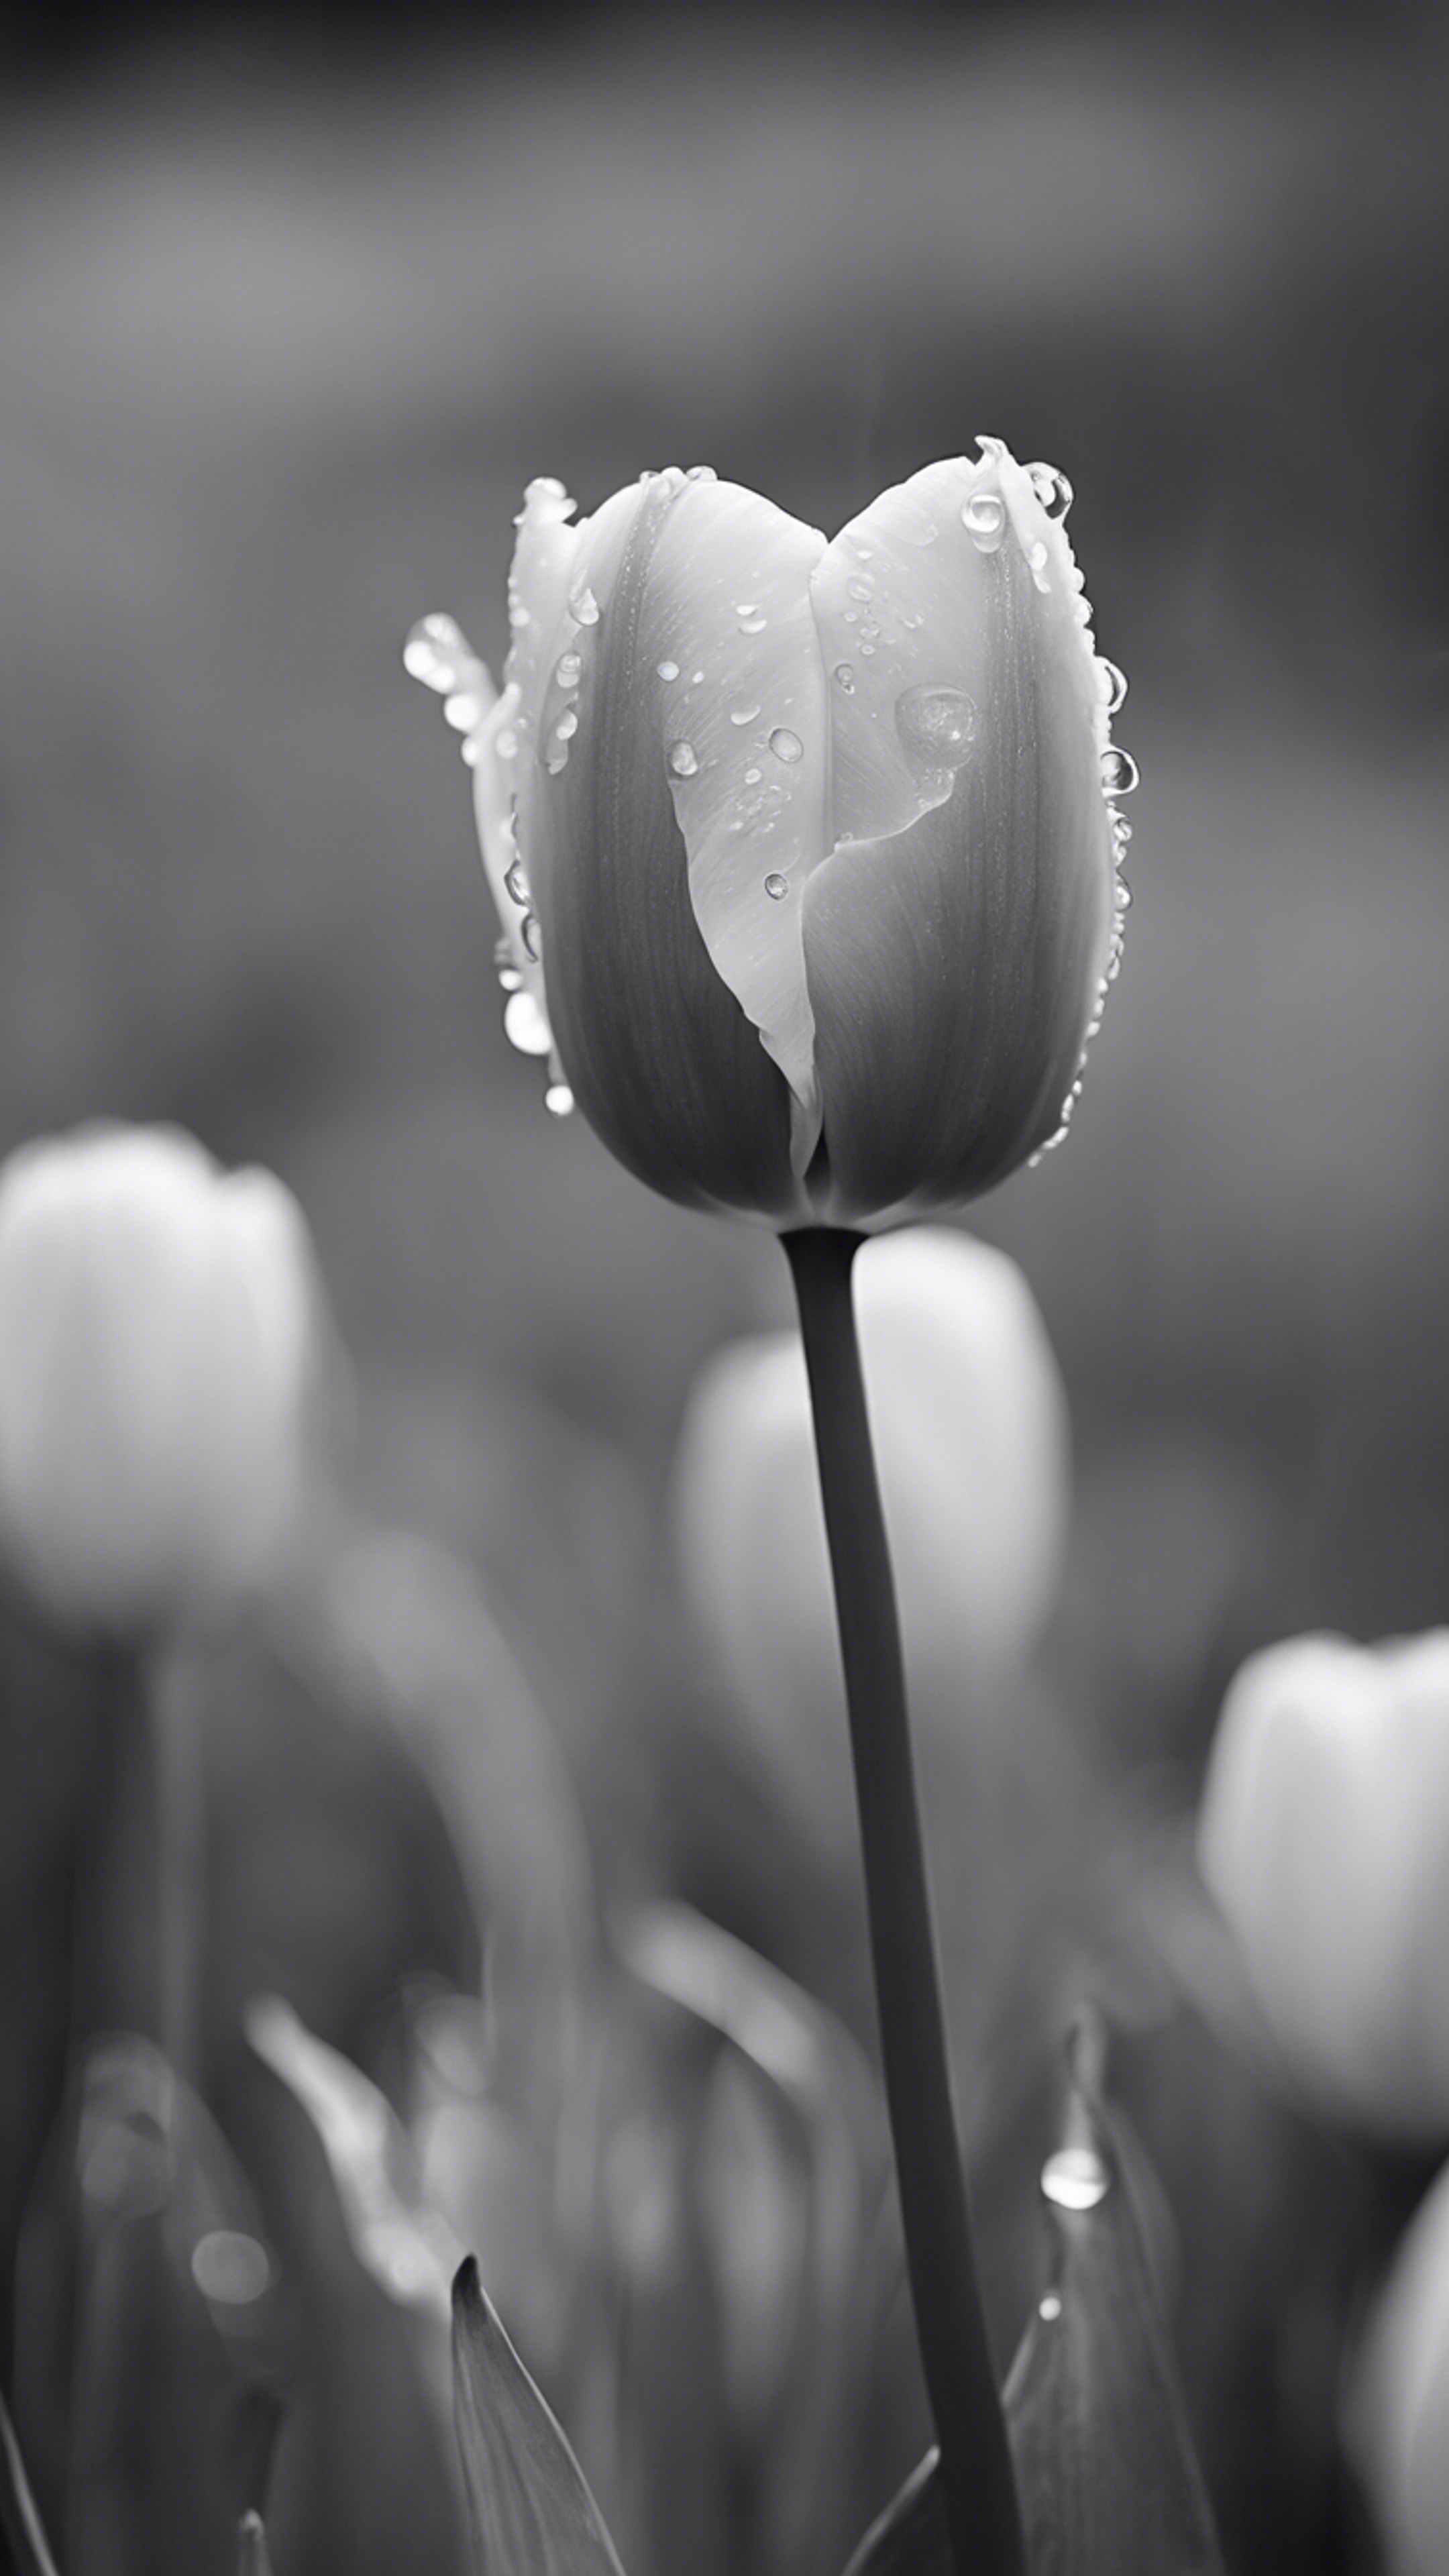 A black-and-white photograph of a tulip in full bloom in the rain.壁紙[646ce87a121a4320b6e6]